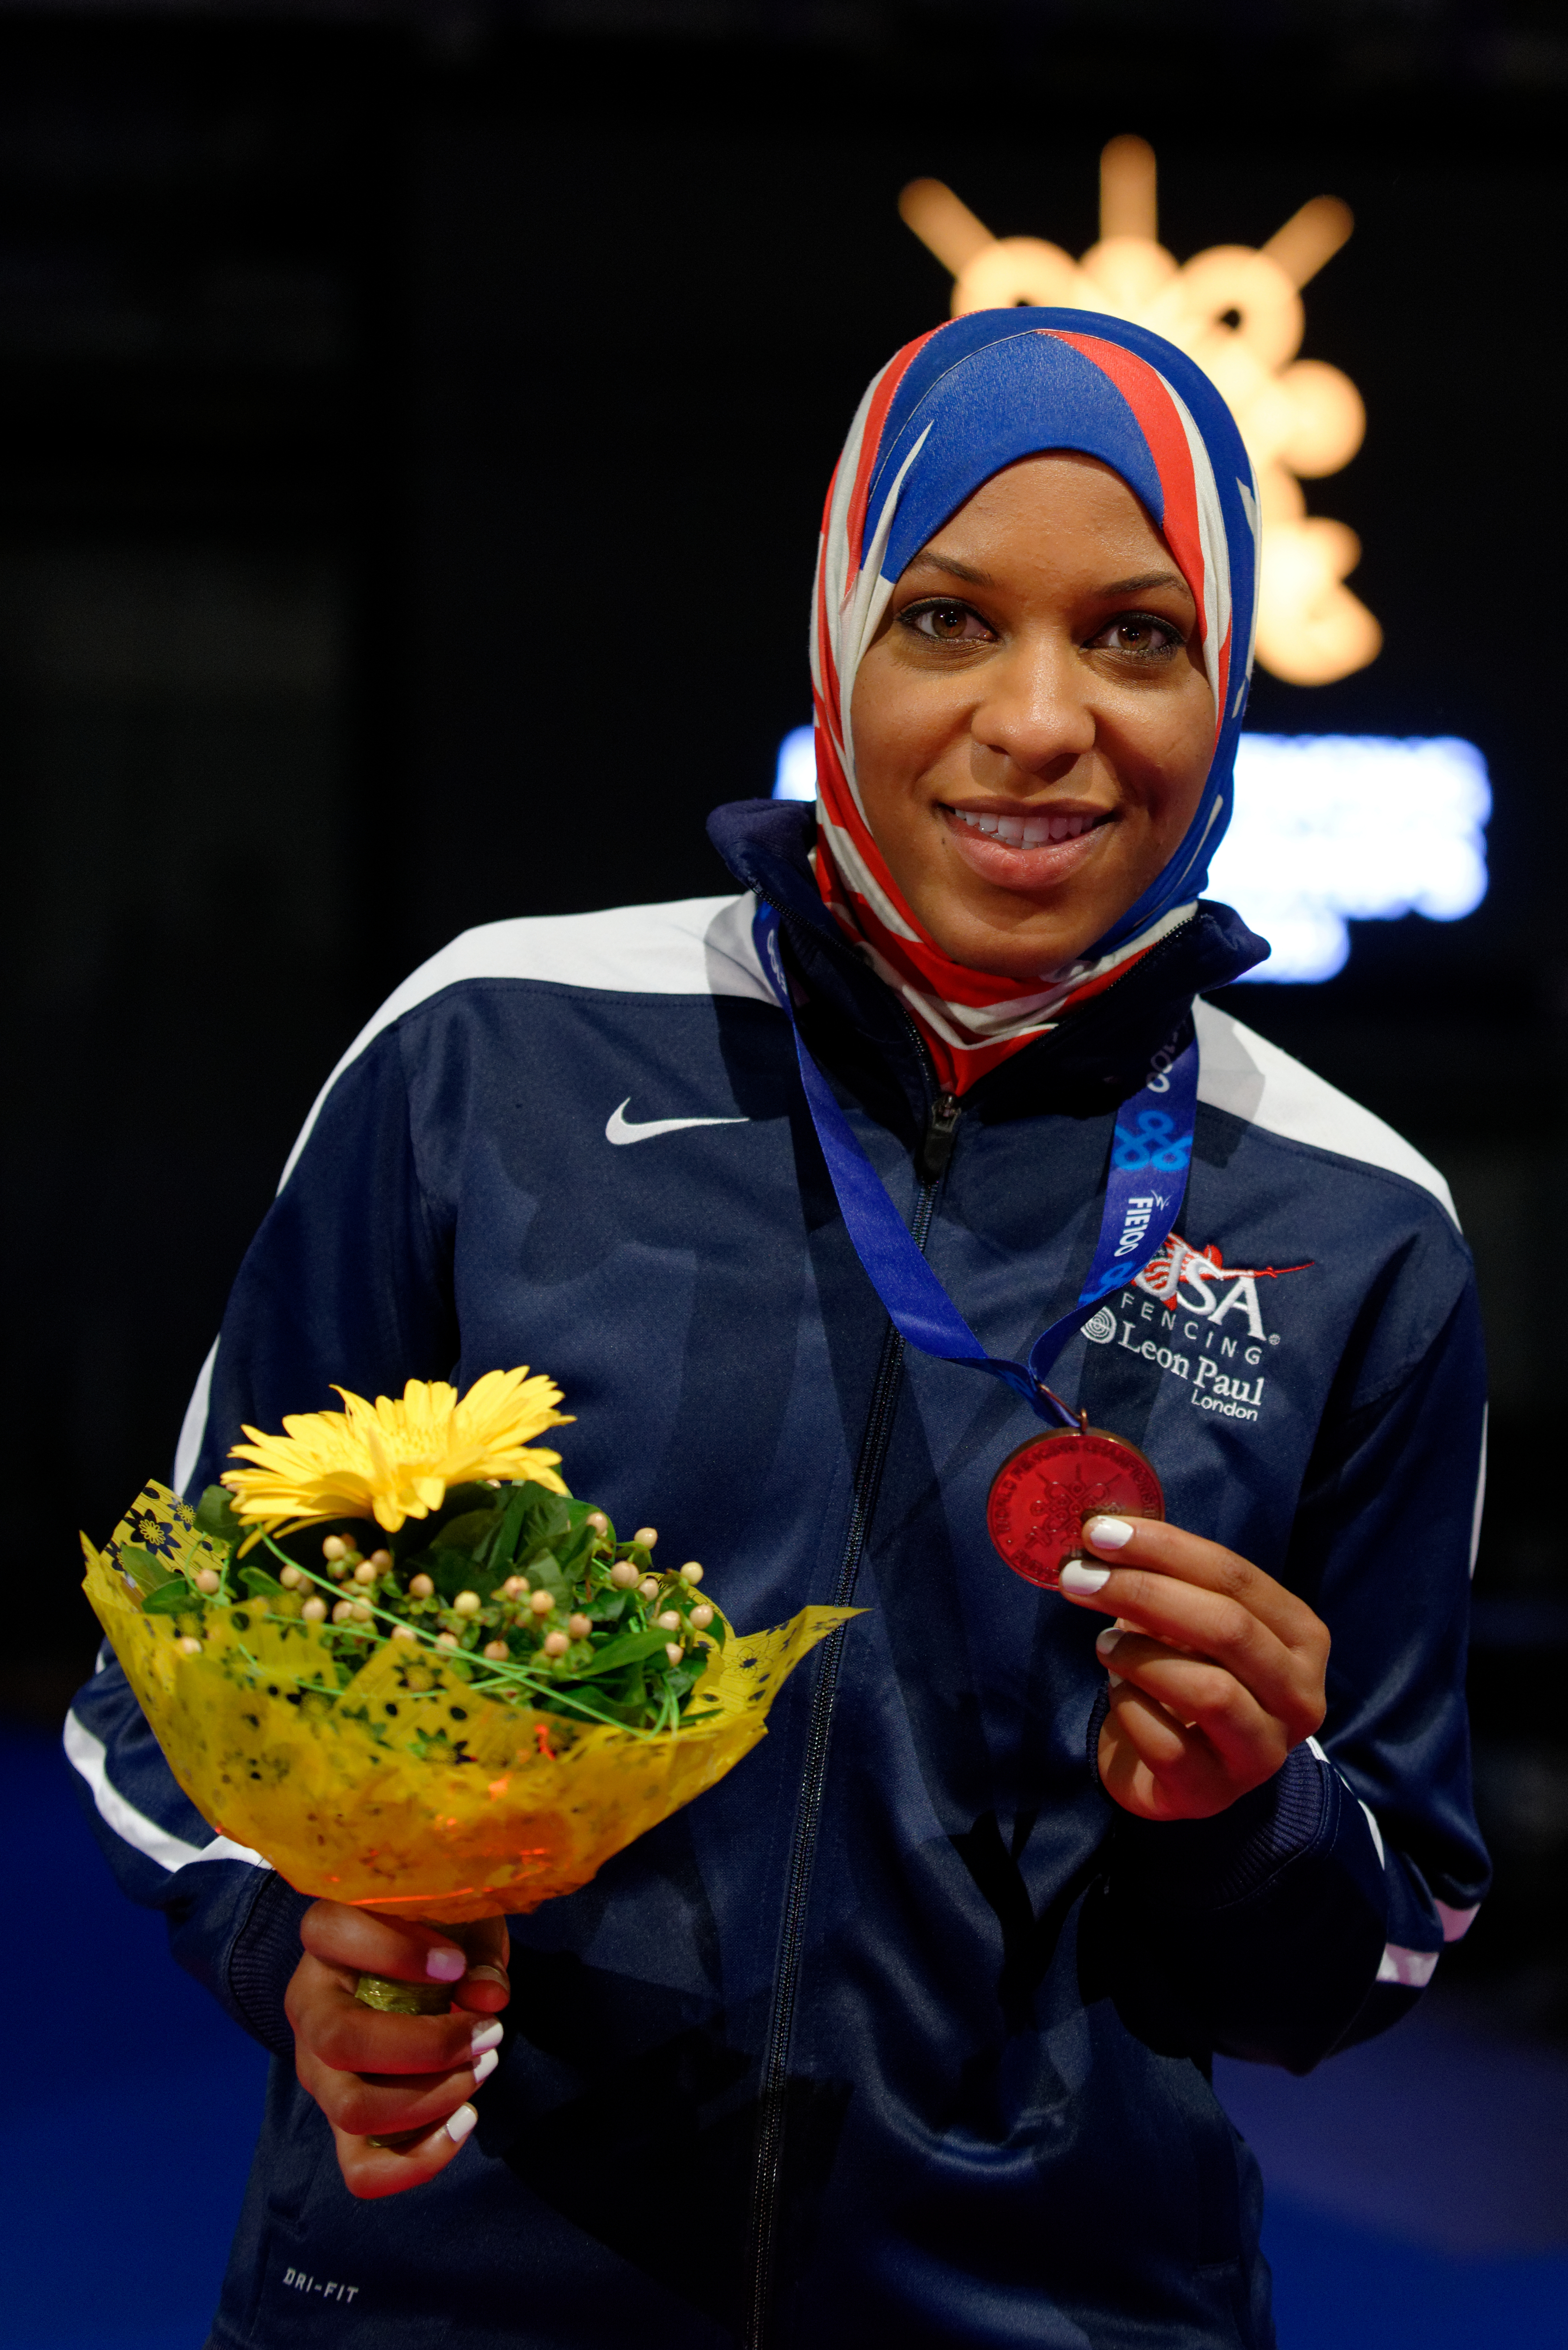 Ibtihaj Muhammad took up fencing at 13 because it meant she could remain fully covered while taking part in a sport